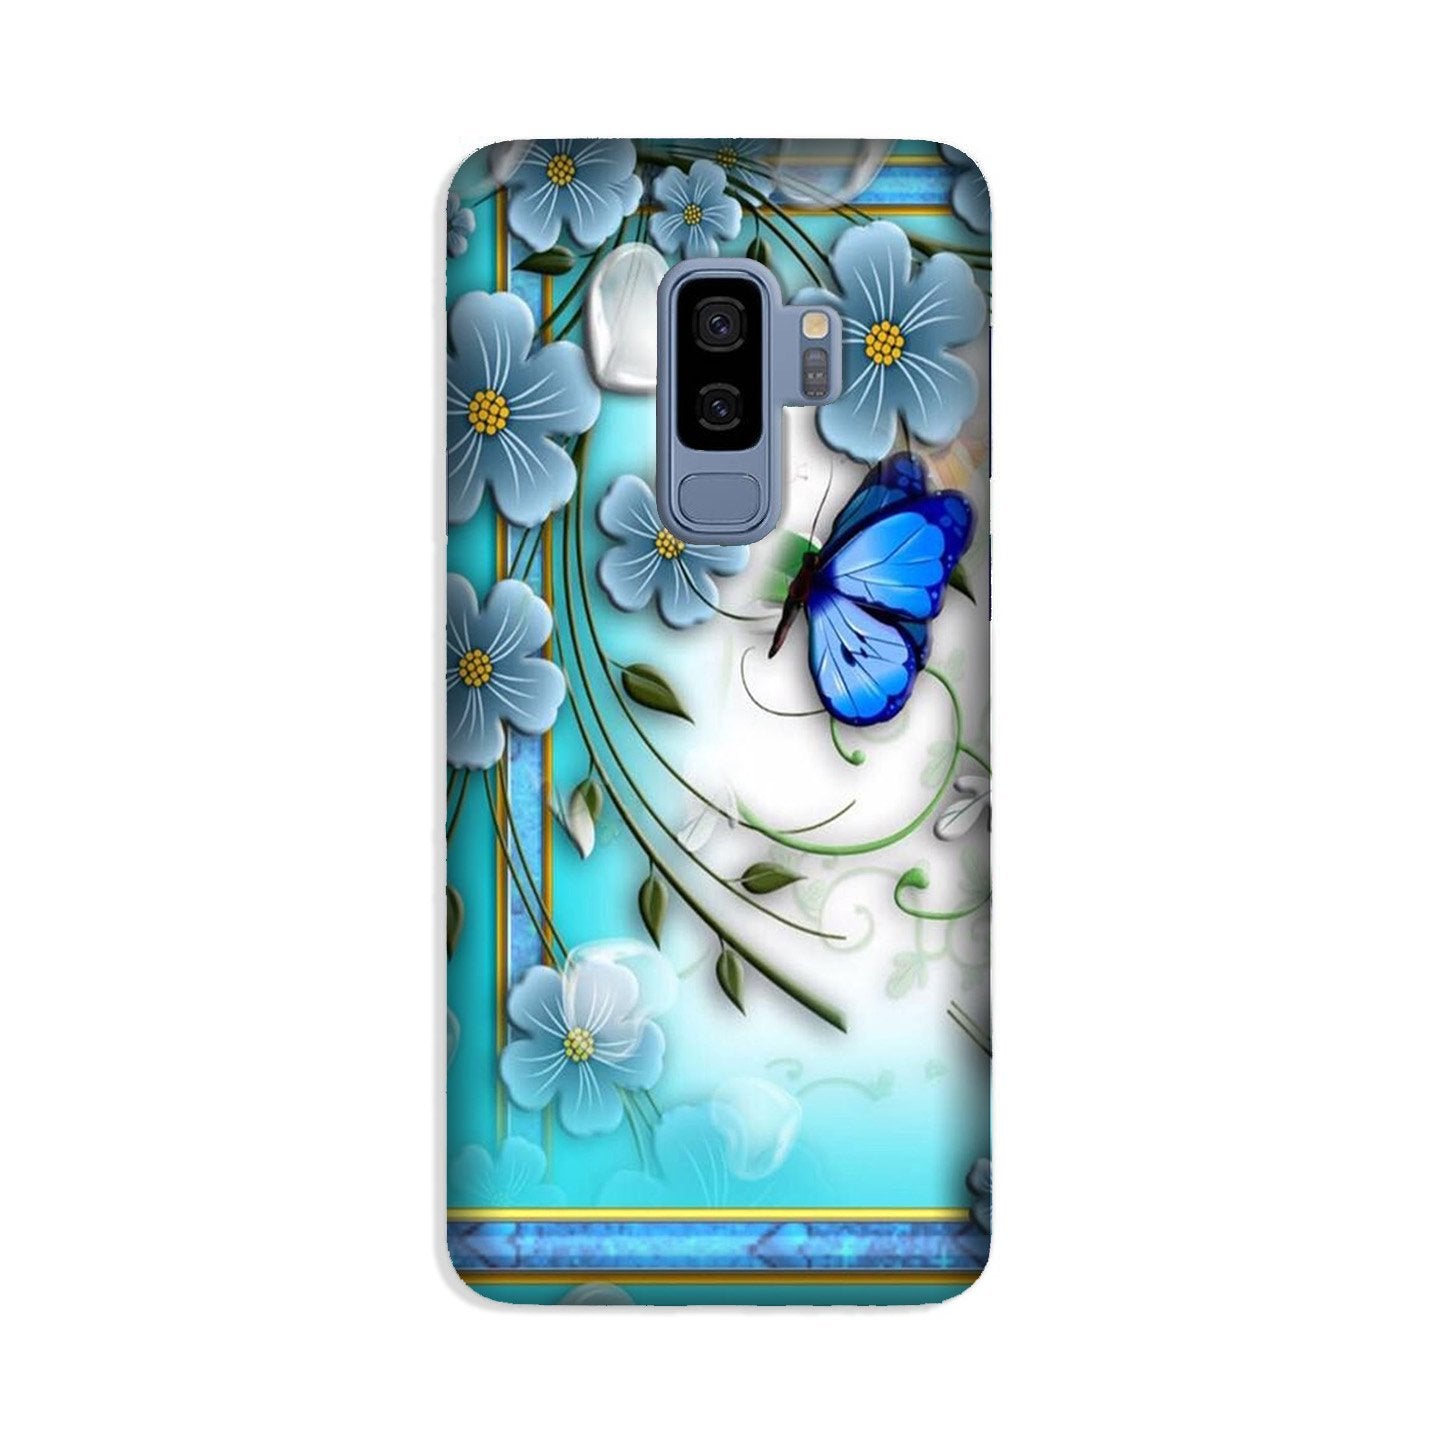 Blue Butterfly Case for Galaxy S9 Plus